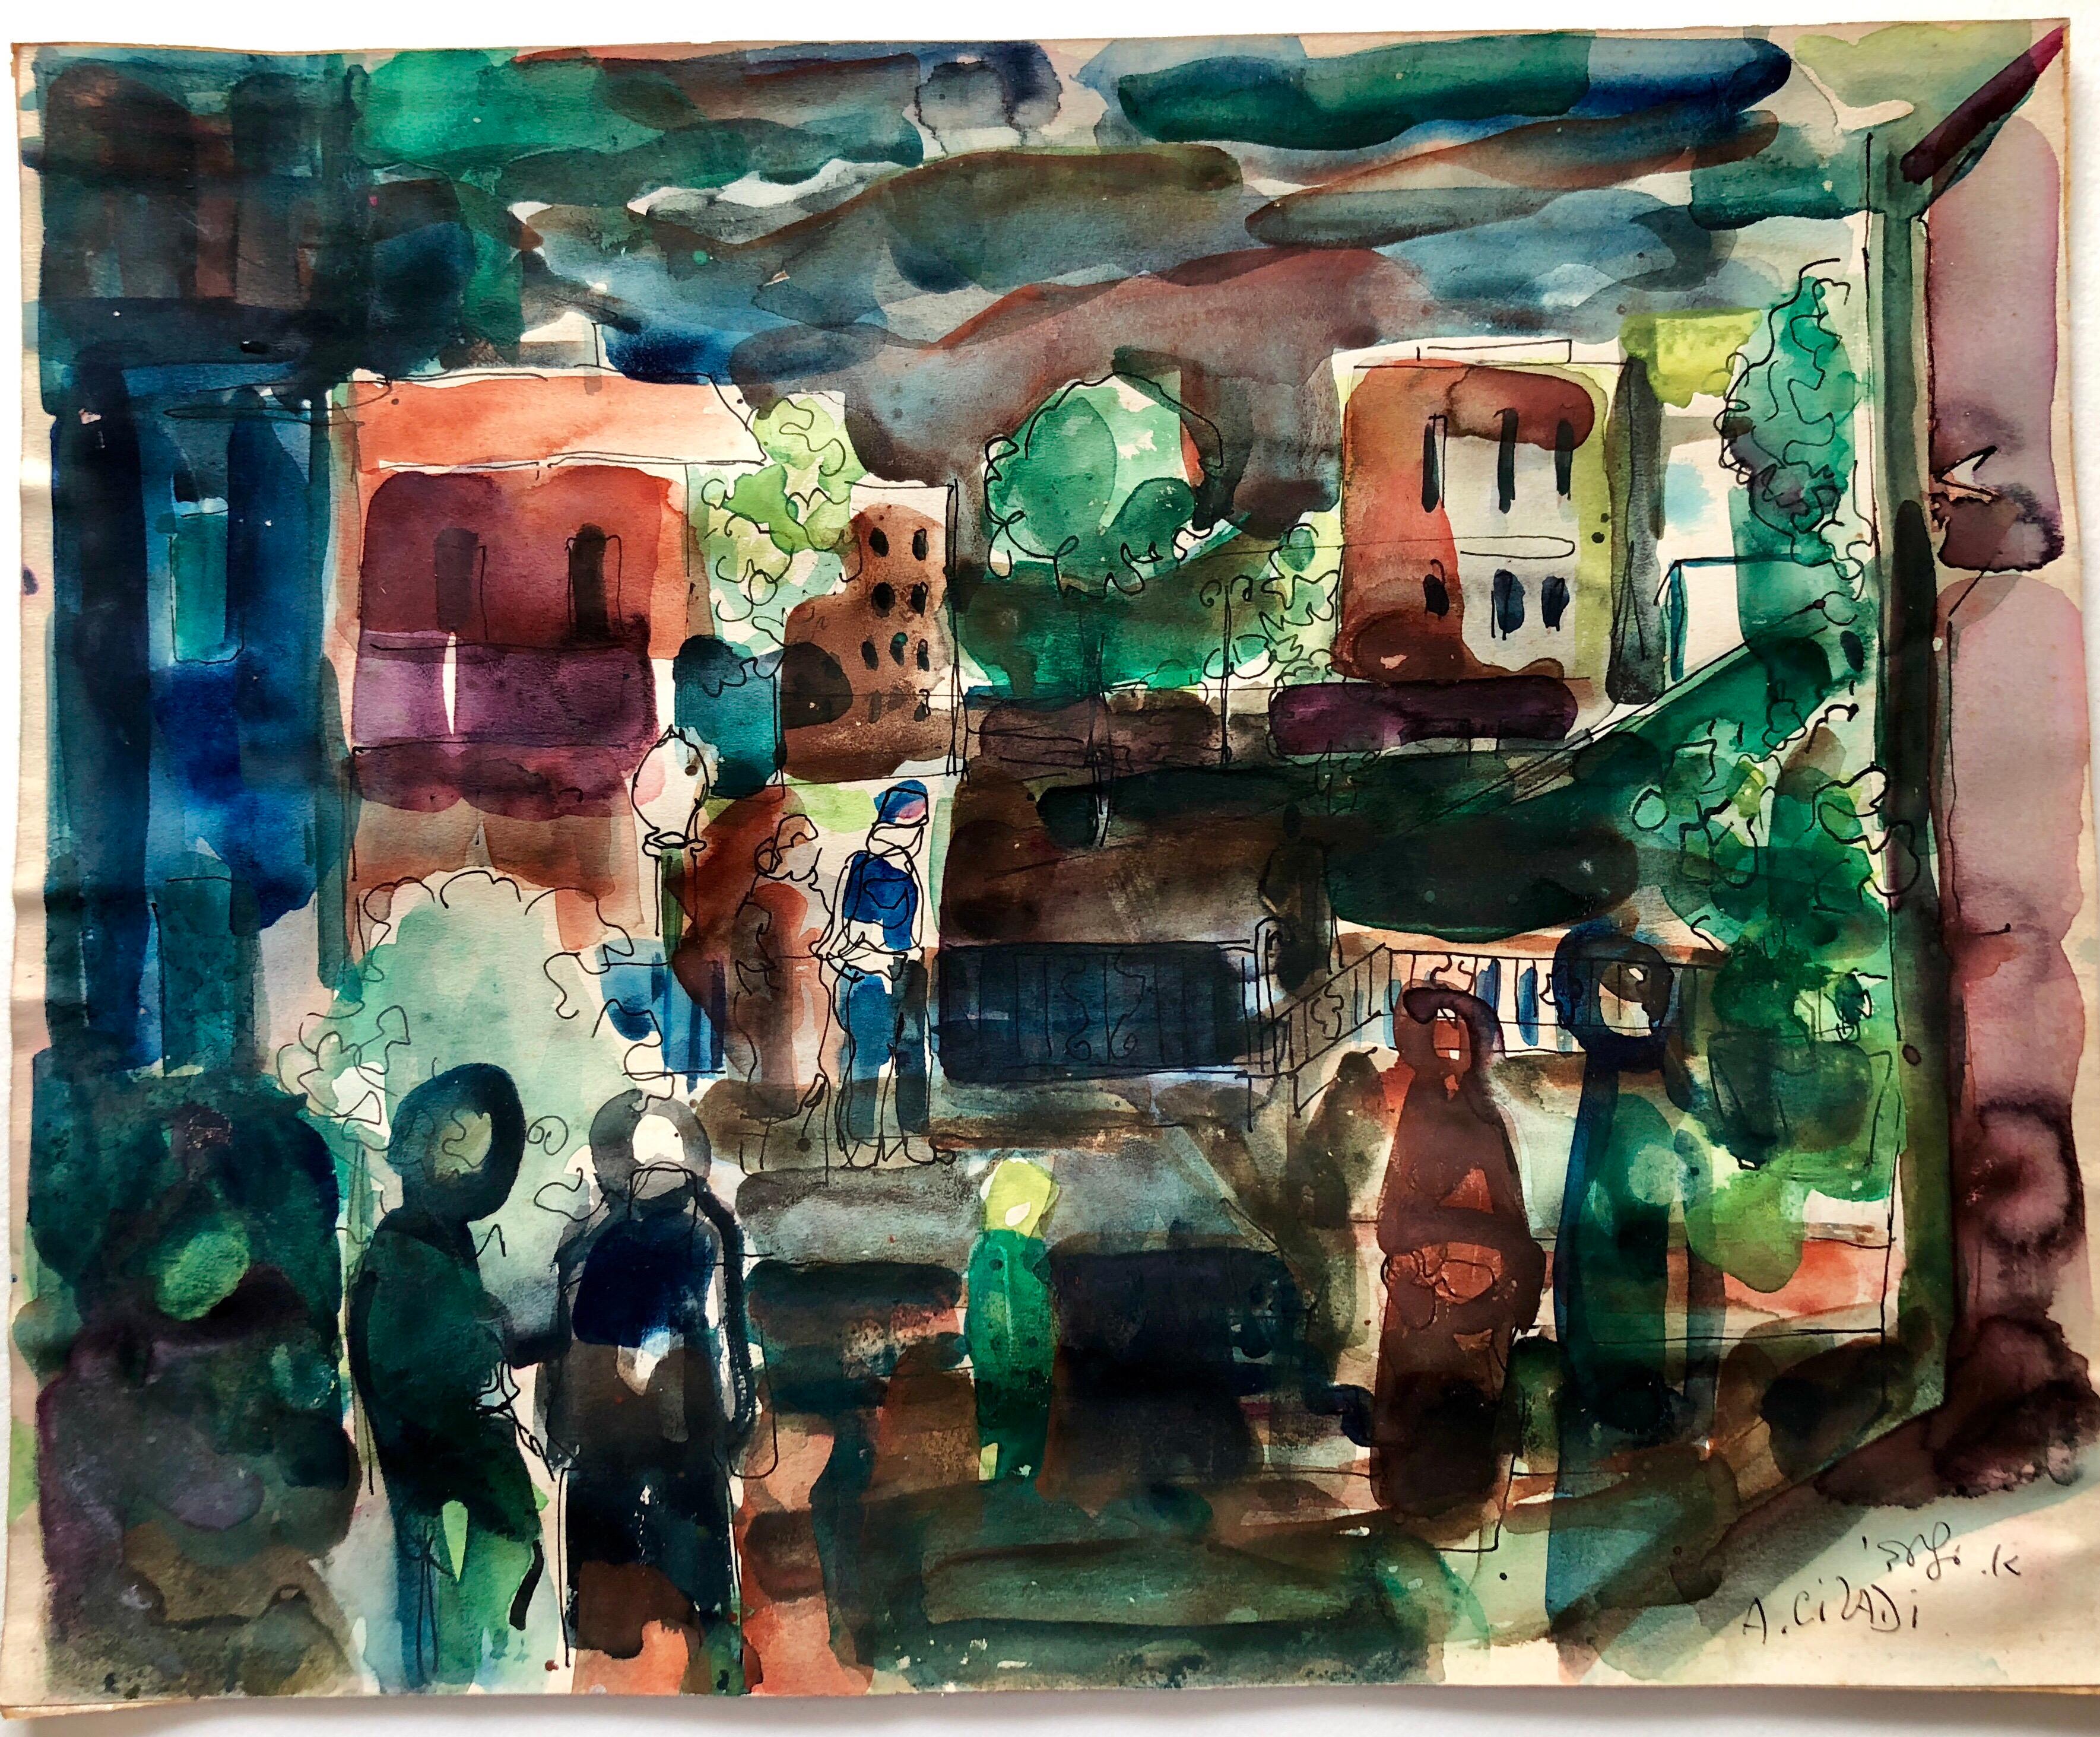 Signed in English and in Hebrew Abstract Expressionist bold, vibrant, colorful watercolor painting.

Aharon Giladi, Israeli painter, born in Russian Empire, 1907-1993
Aharon Golodetz (later Giladi) was born in Belarus, Russia to a wealthy family. In